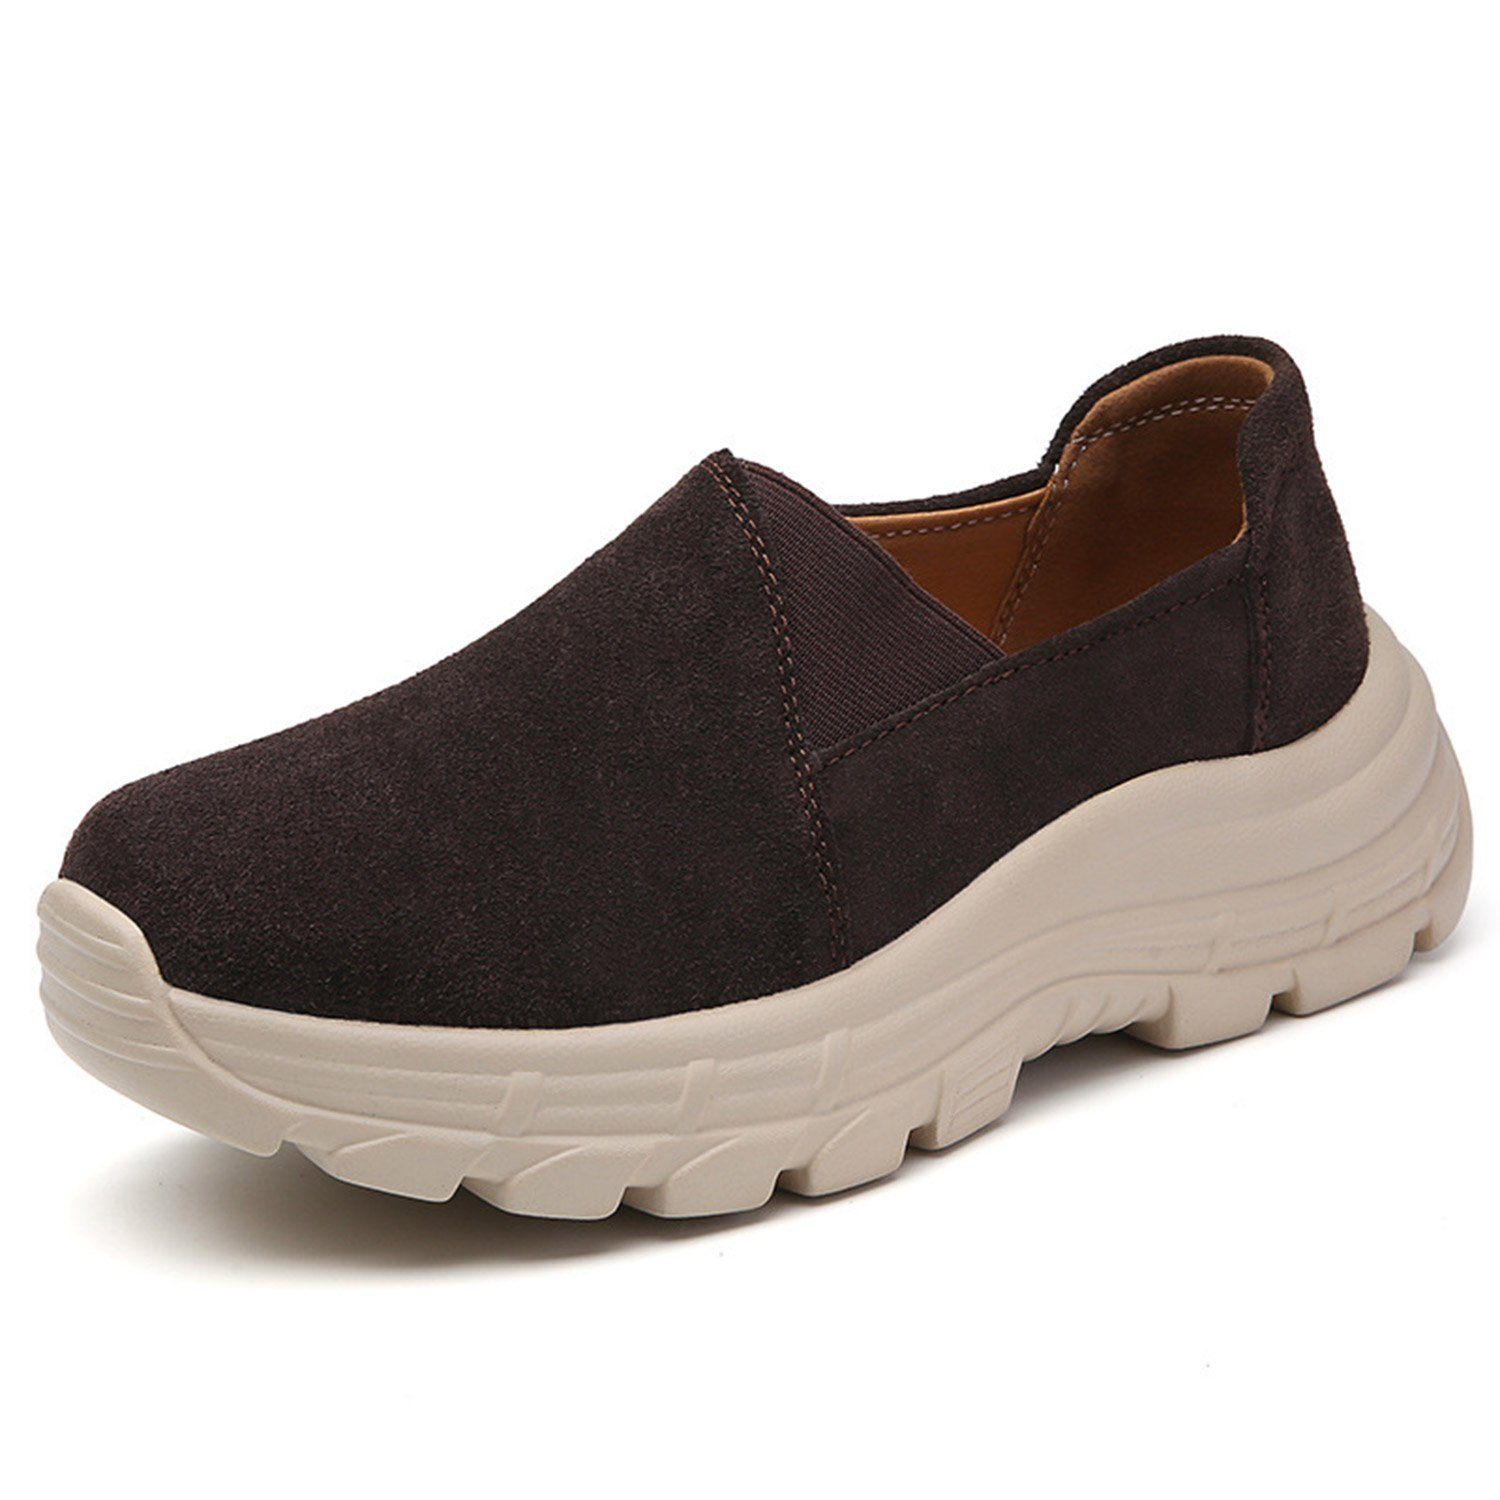 Daisred Turnschuhe mit Plateausohle Bequeme Sneakers Loafer Kaffee